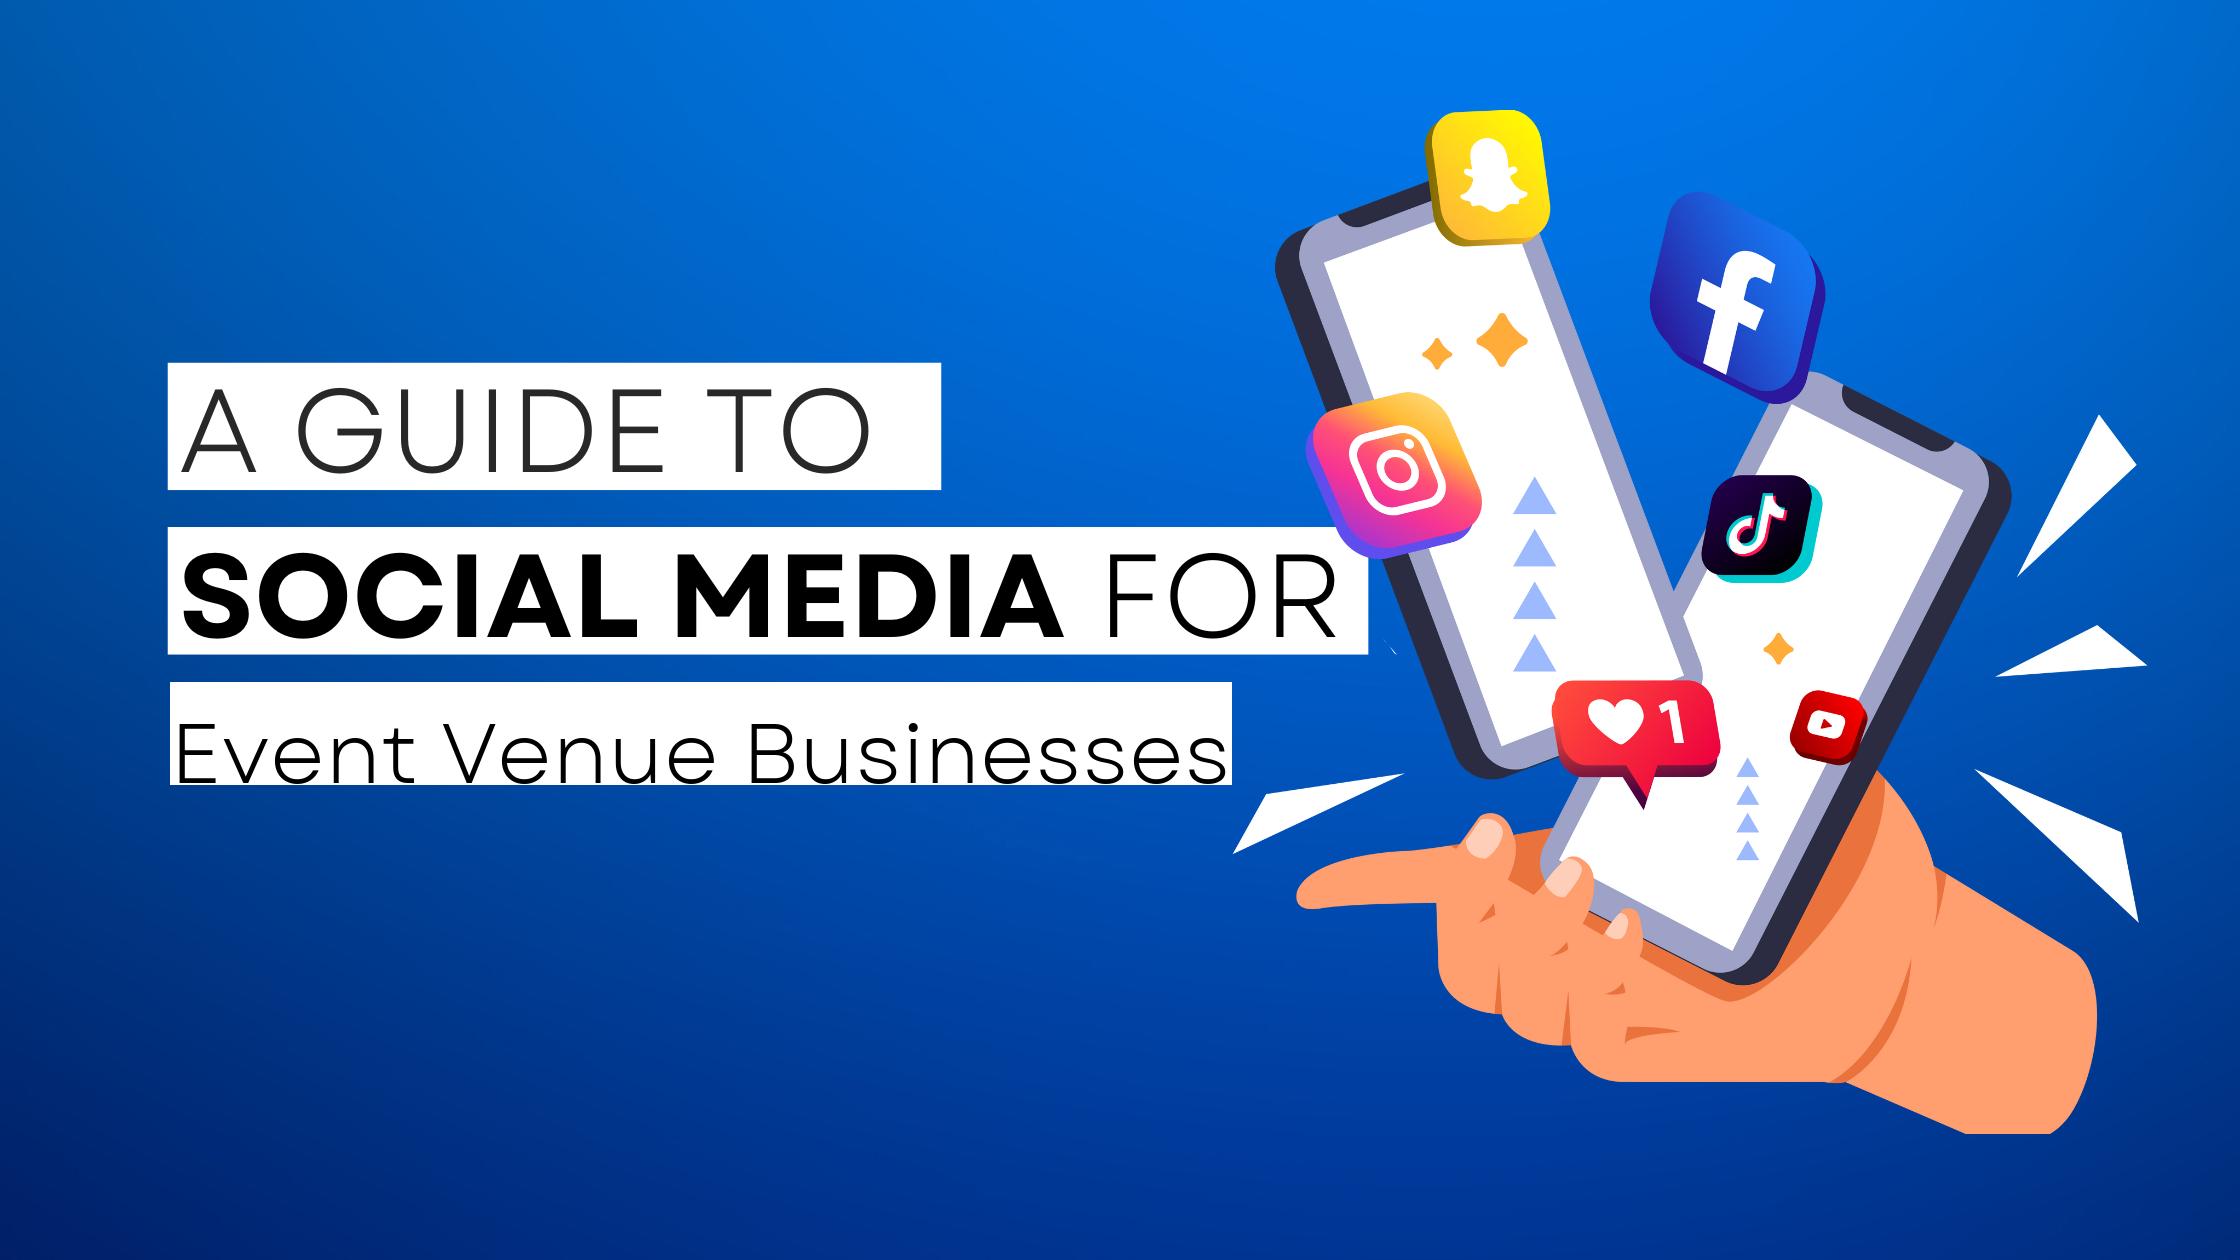 How to start Event Venue on social media